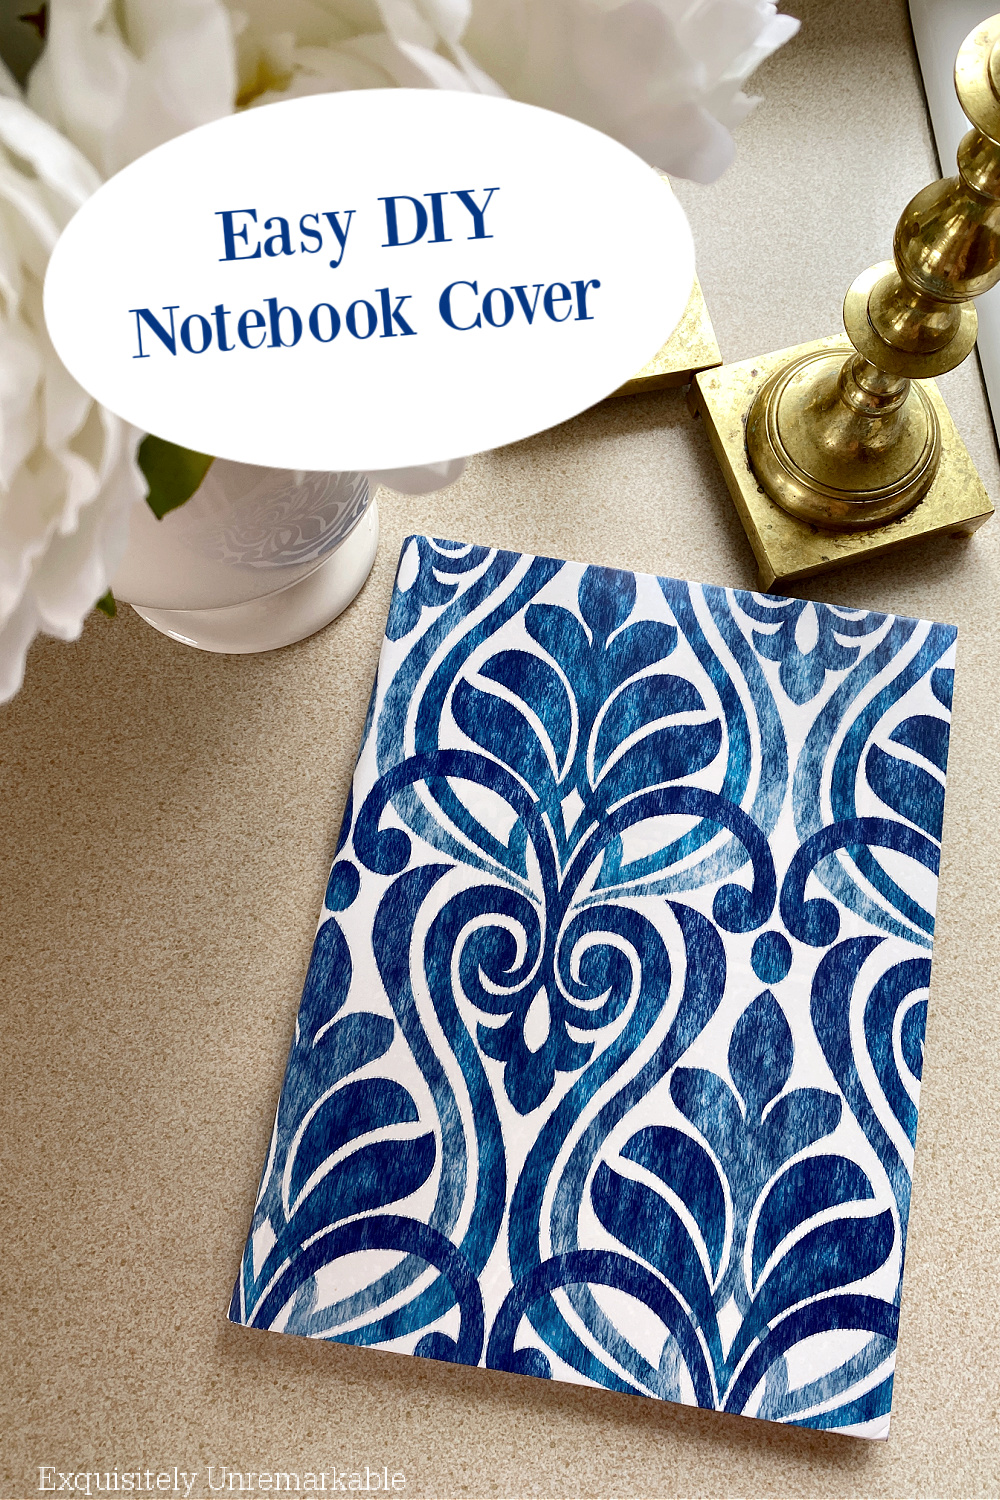 Easy DIY Notebook Cover text over notebook on counter between flowers vase and candlesticks